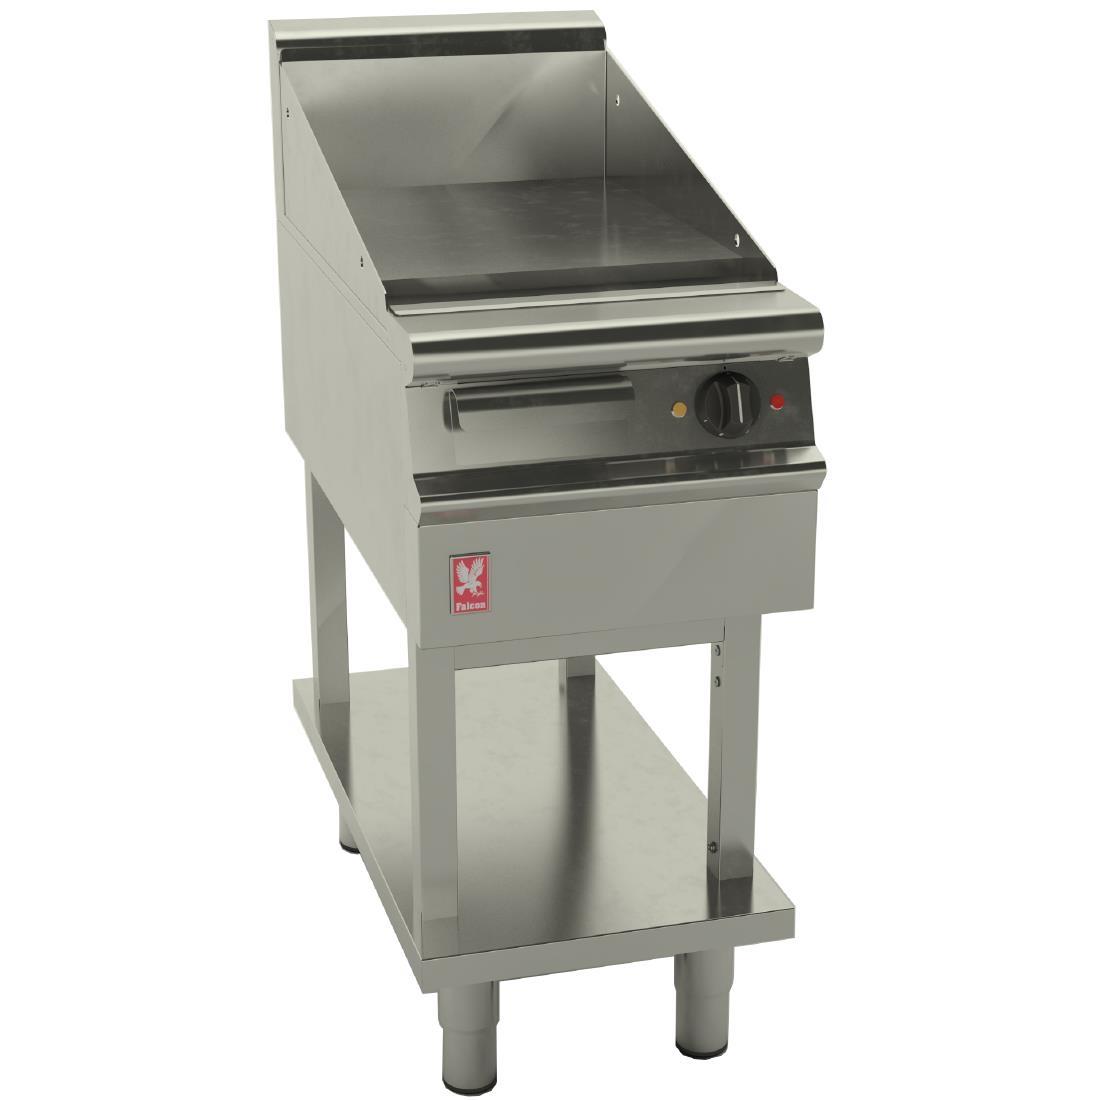 Falcon Dominator Plus 400mm Wide Smooth Griddle on Fixed Stand E3441 - GP099  - 1